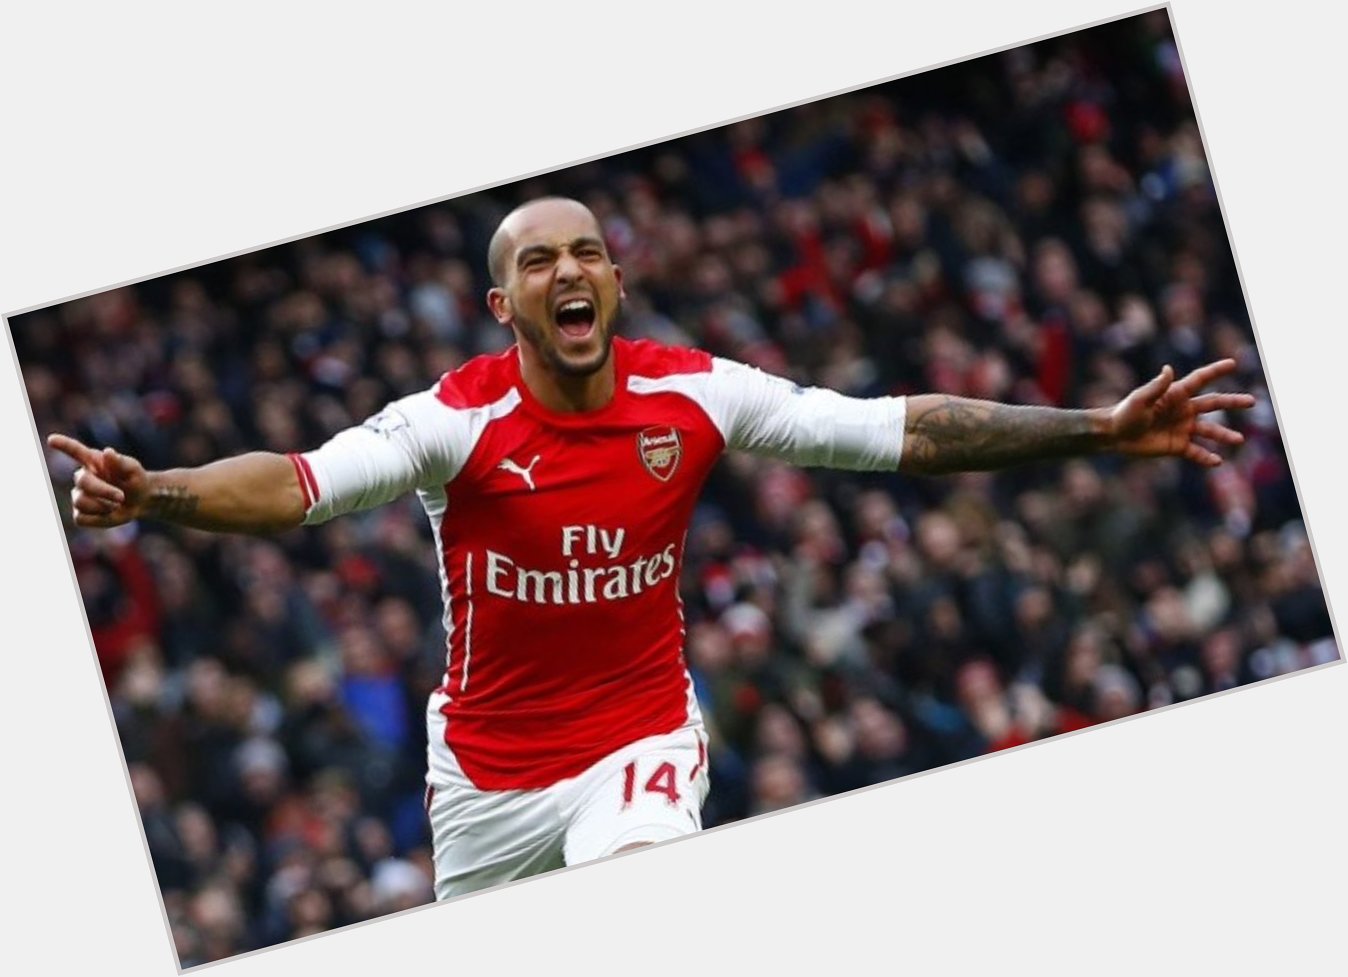 Happy 31st Birthday to Theo Walcott 397 appearances
108 goals 
77 assists
3 FA Cups 